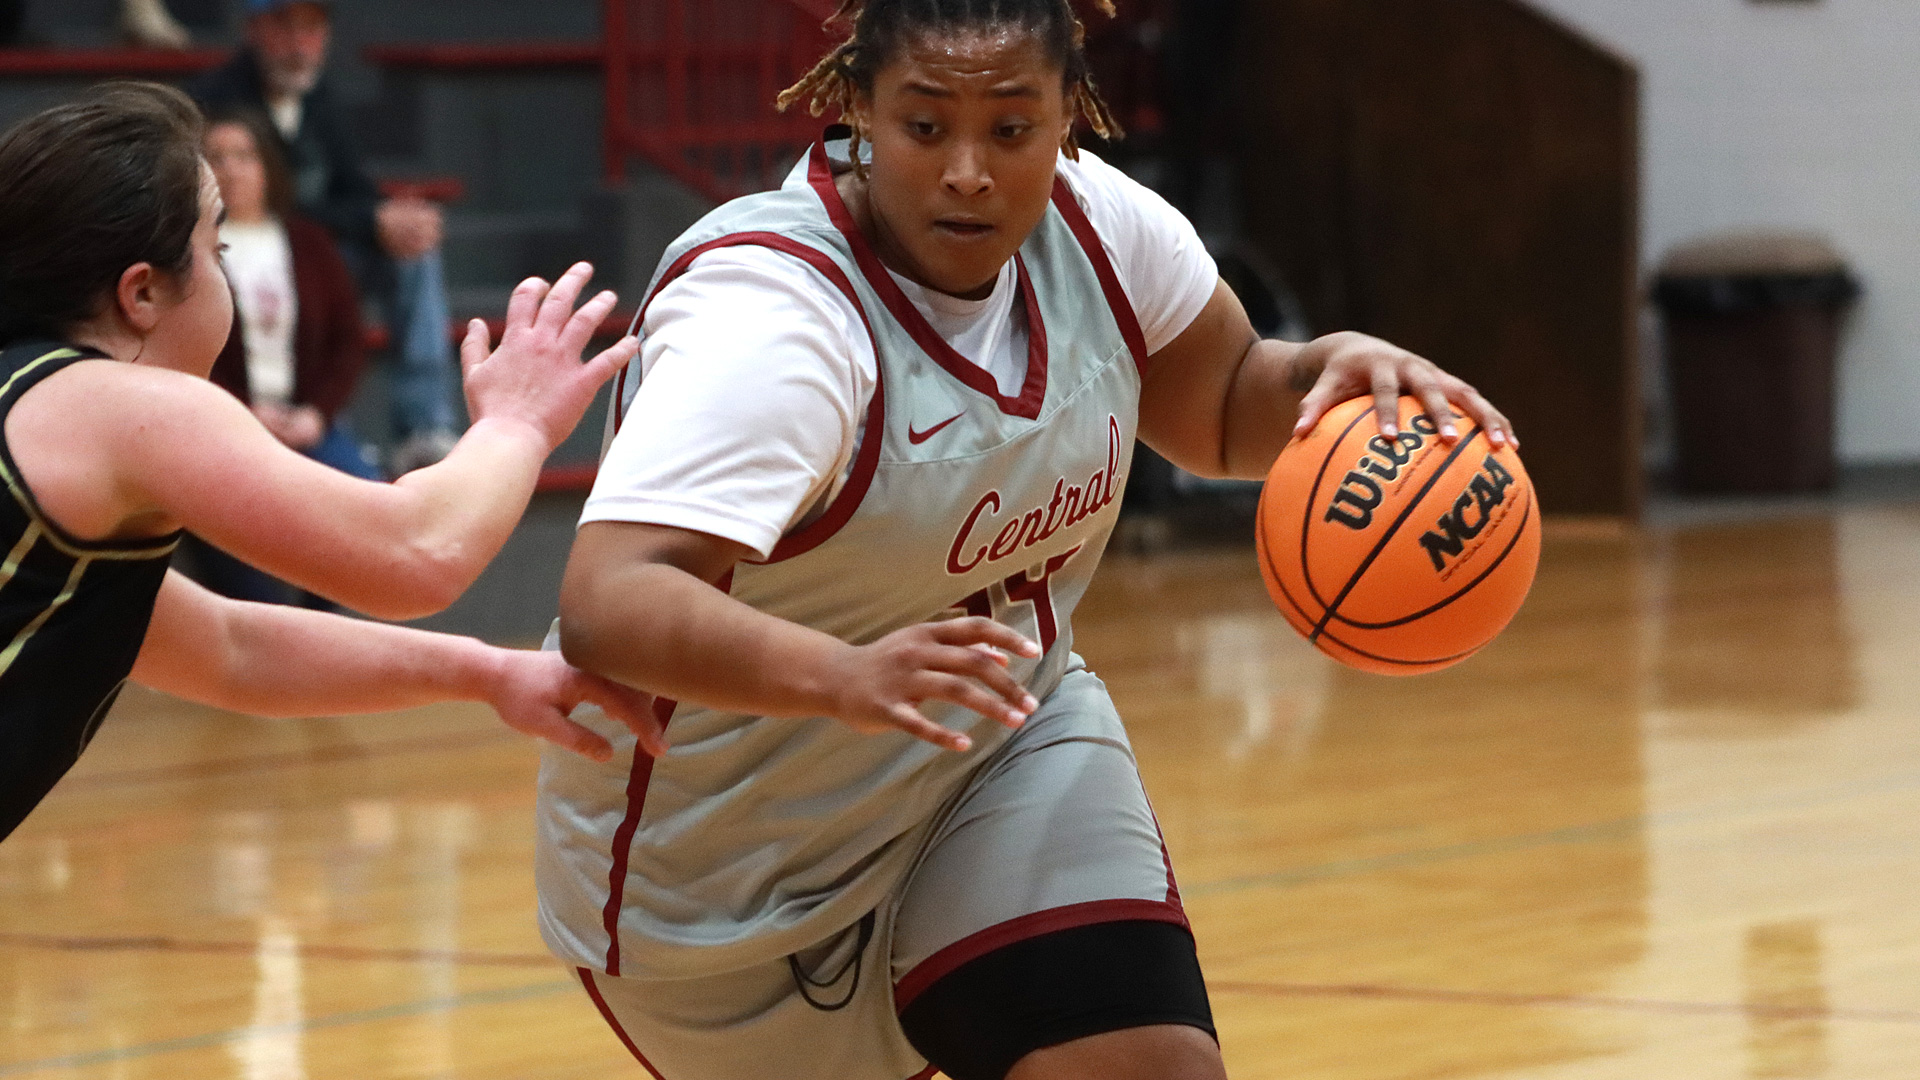 CCCB junior Raya Brady scored five points and grabbed eight rebounds on Saturday during the Saints' 61-53 victory over Free Lutheran Bible College.